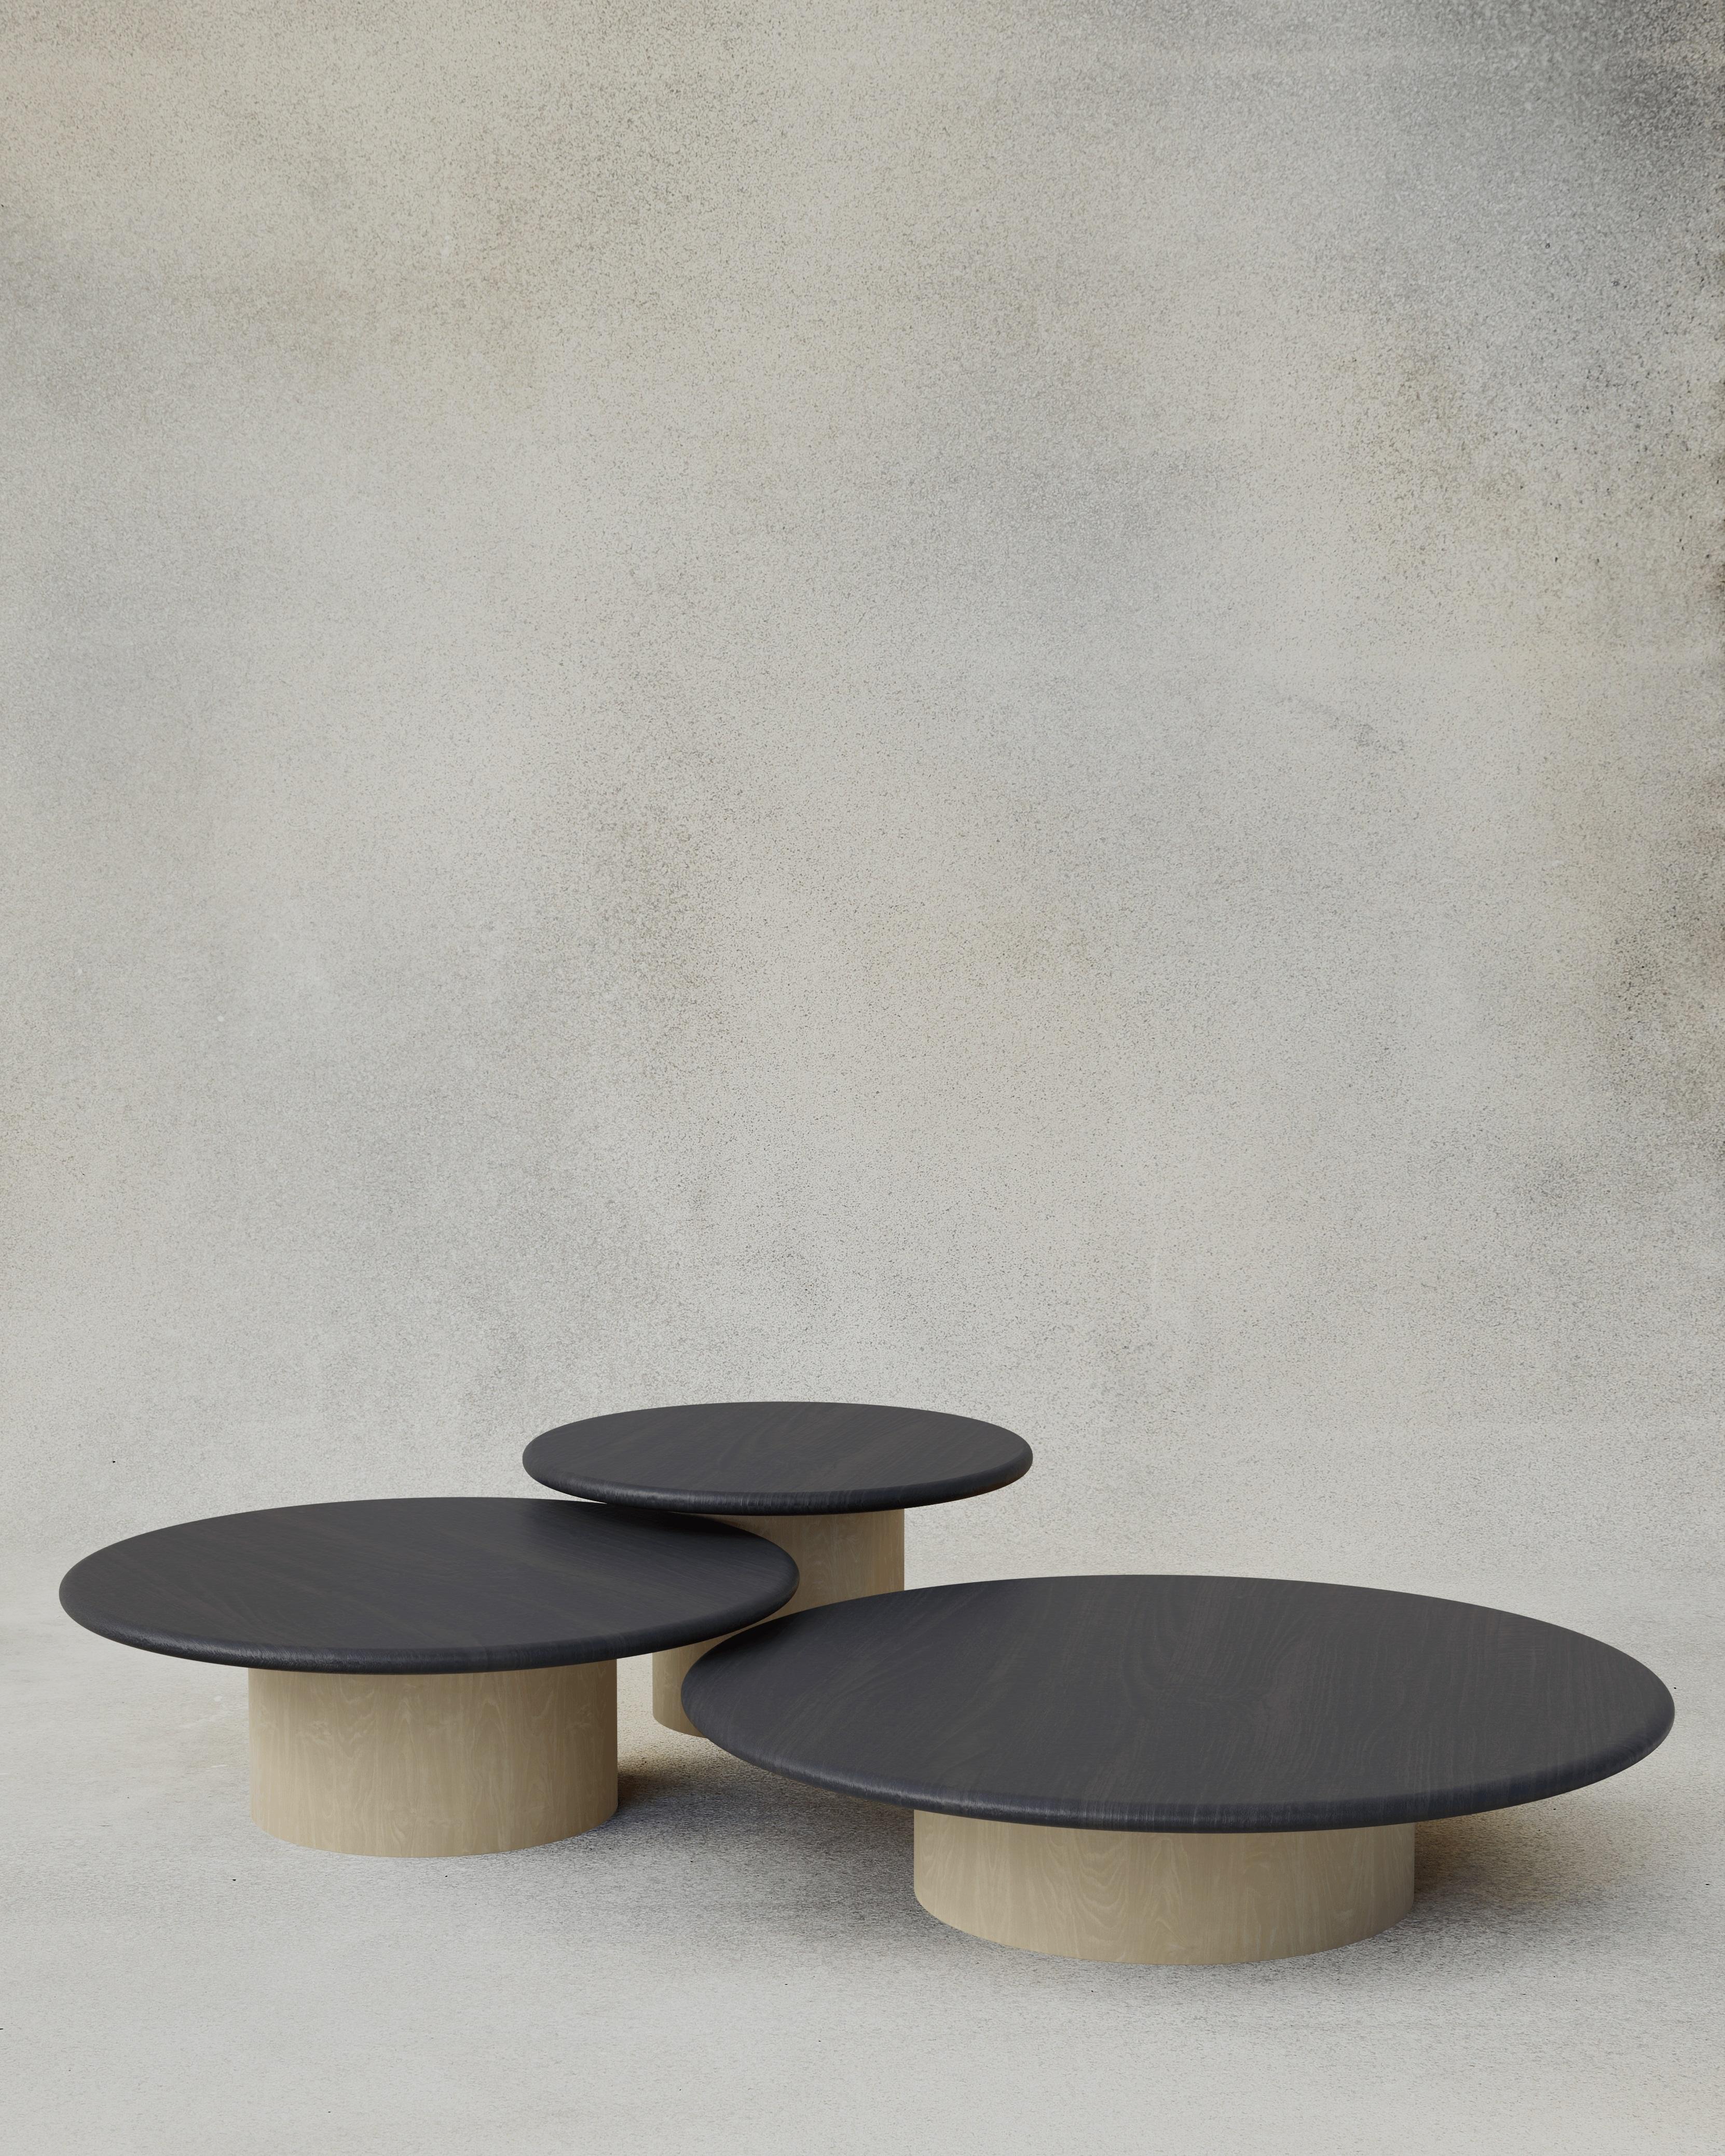 With their circular profiles, varying proportions and potential to be nested, these versatile tables evoke the pattern of raindrops in a pool of water when placed together.

Bought as a set of 600, 800, 1000, we add a 10% discount

Tops: Black